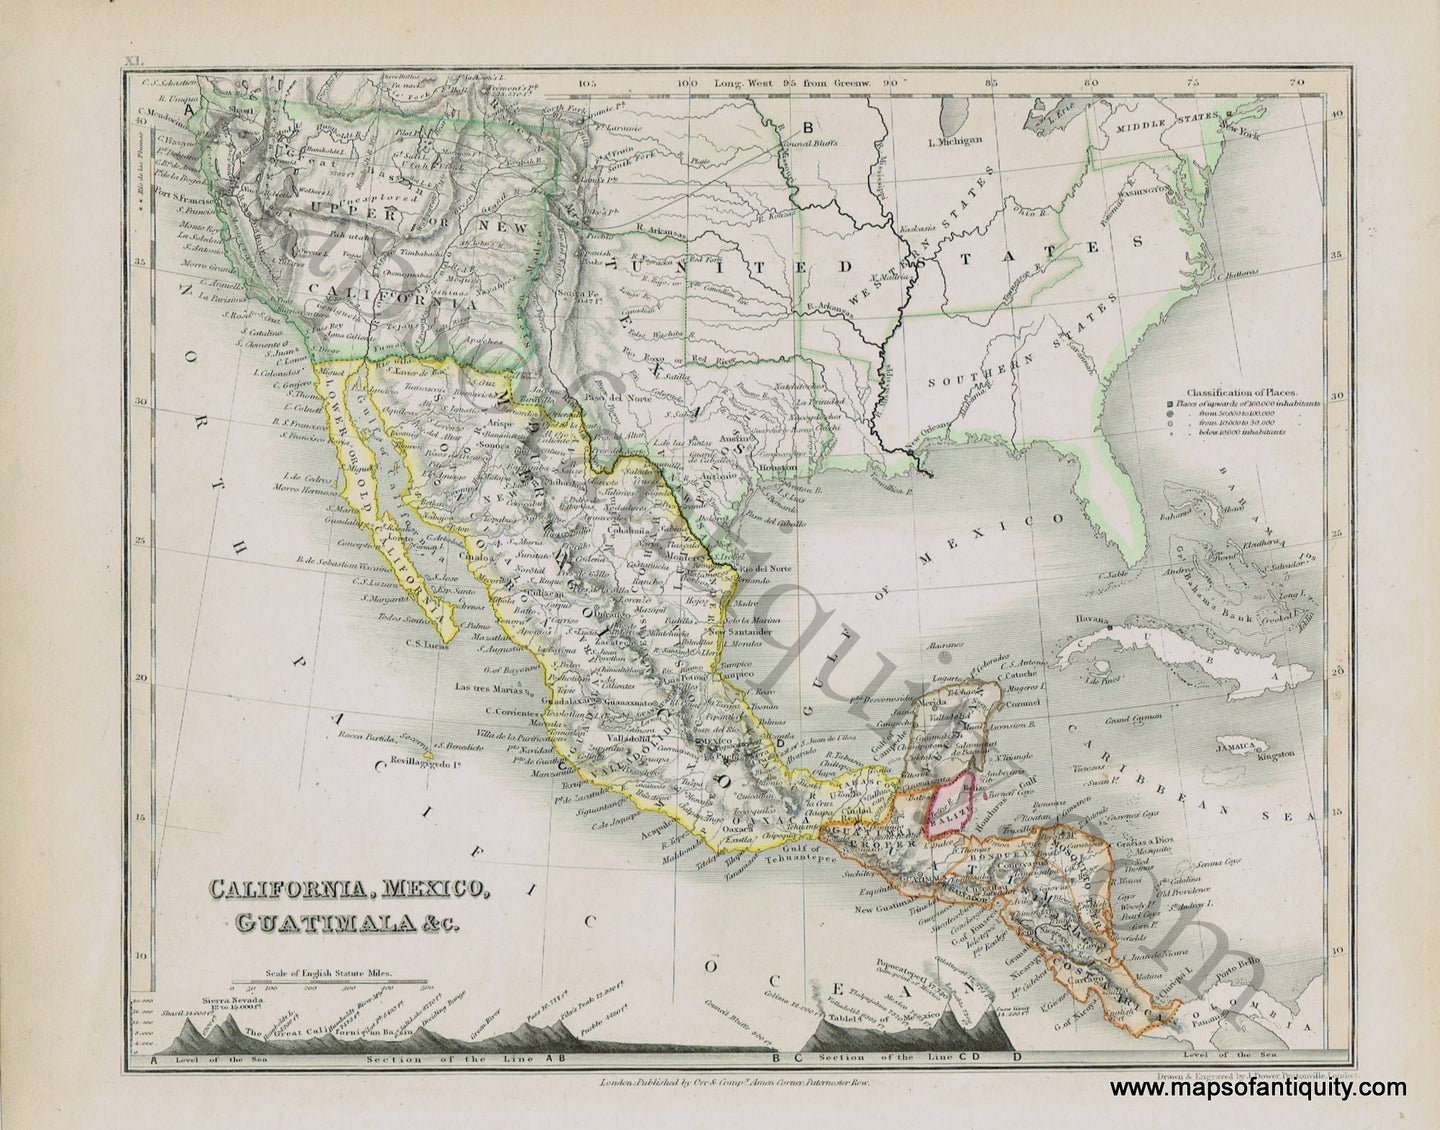 Antique-Map-California-Mexico-Guatimala-Texas-Dower-Orr-1849-1840s-1800s-19th-century-Maps-of-Antiquity